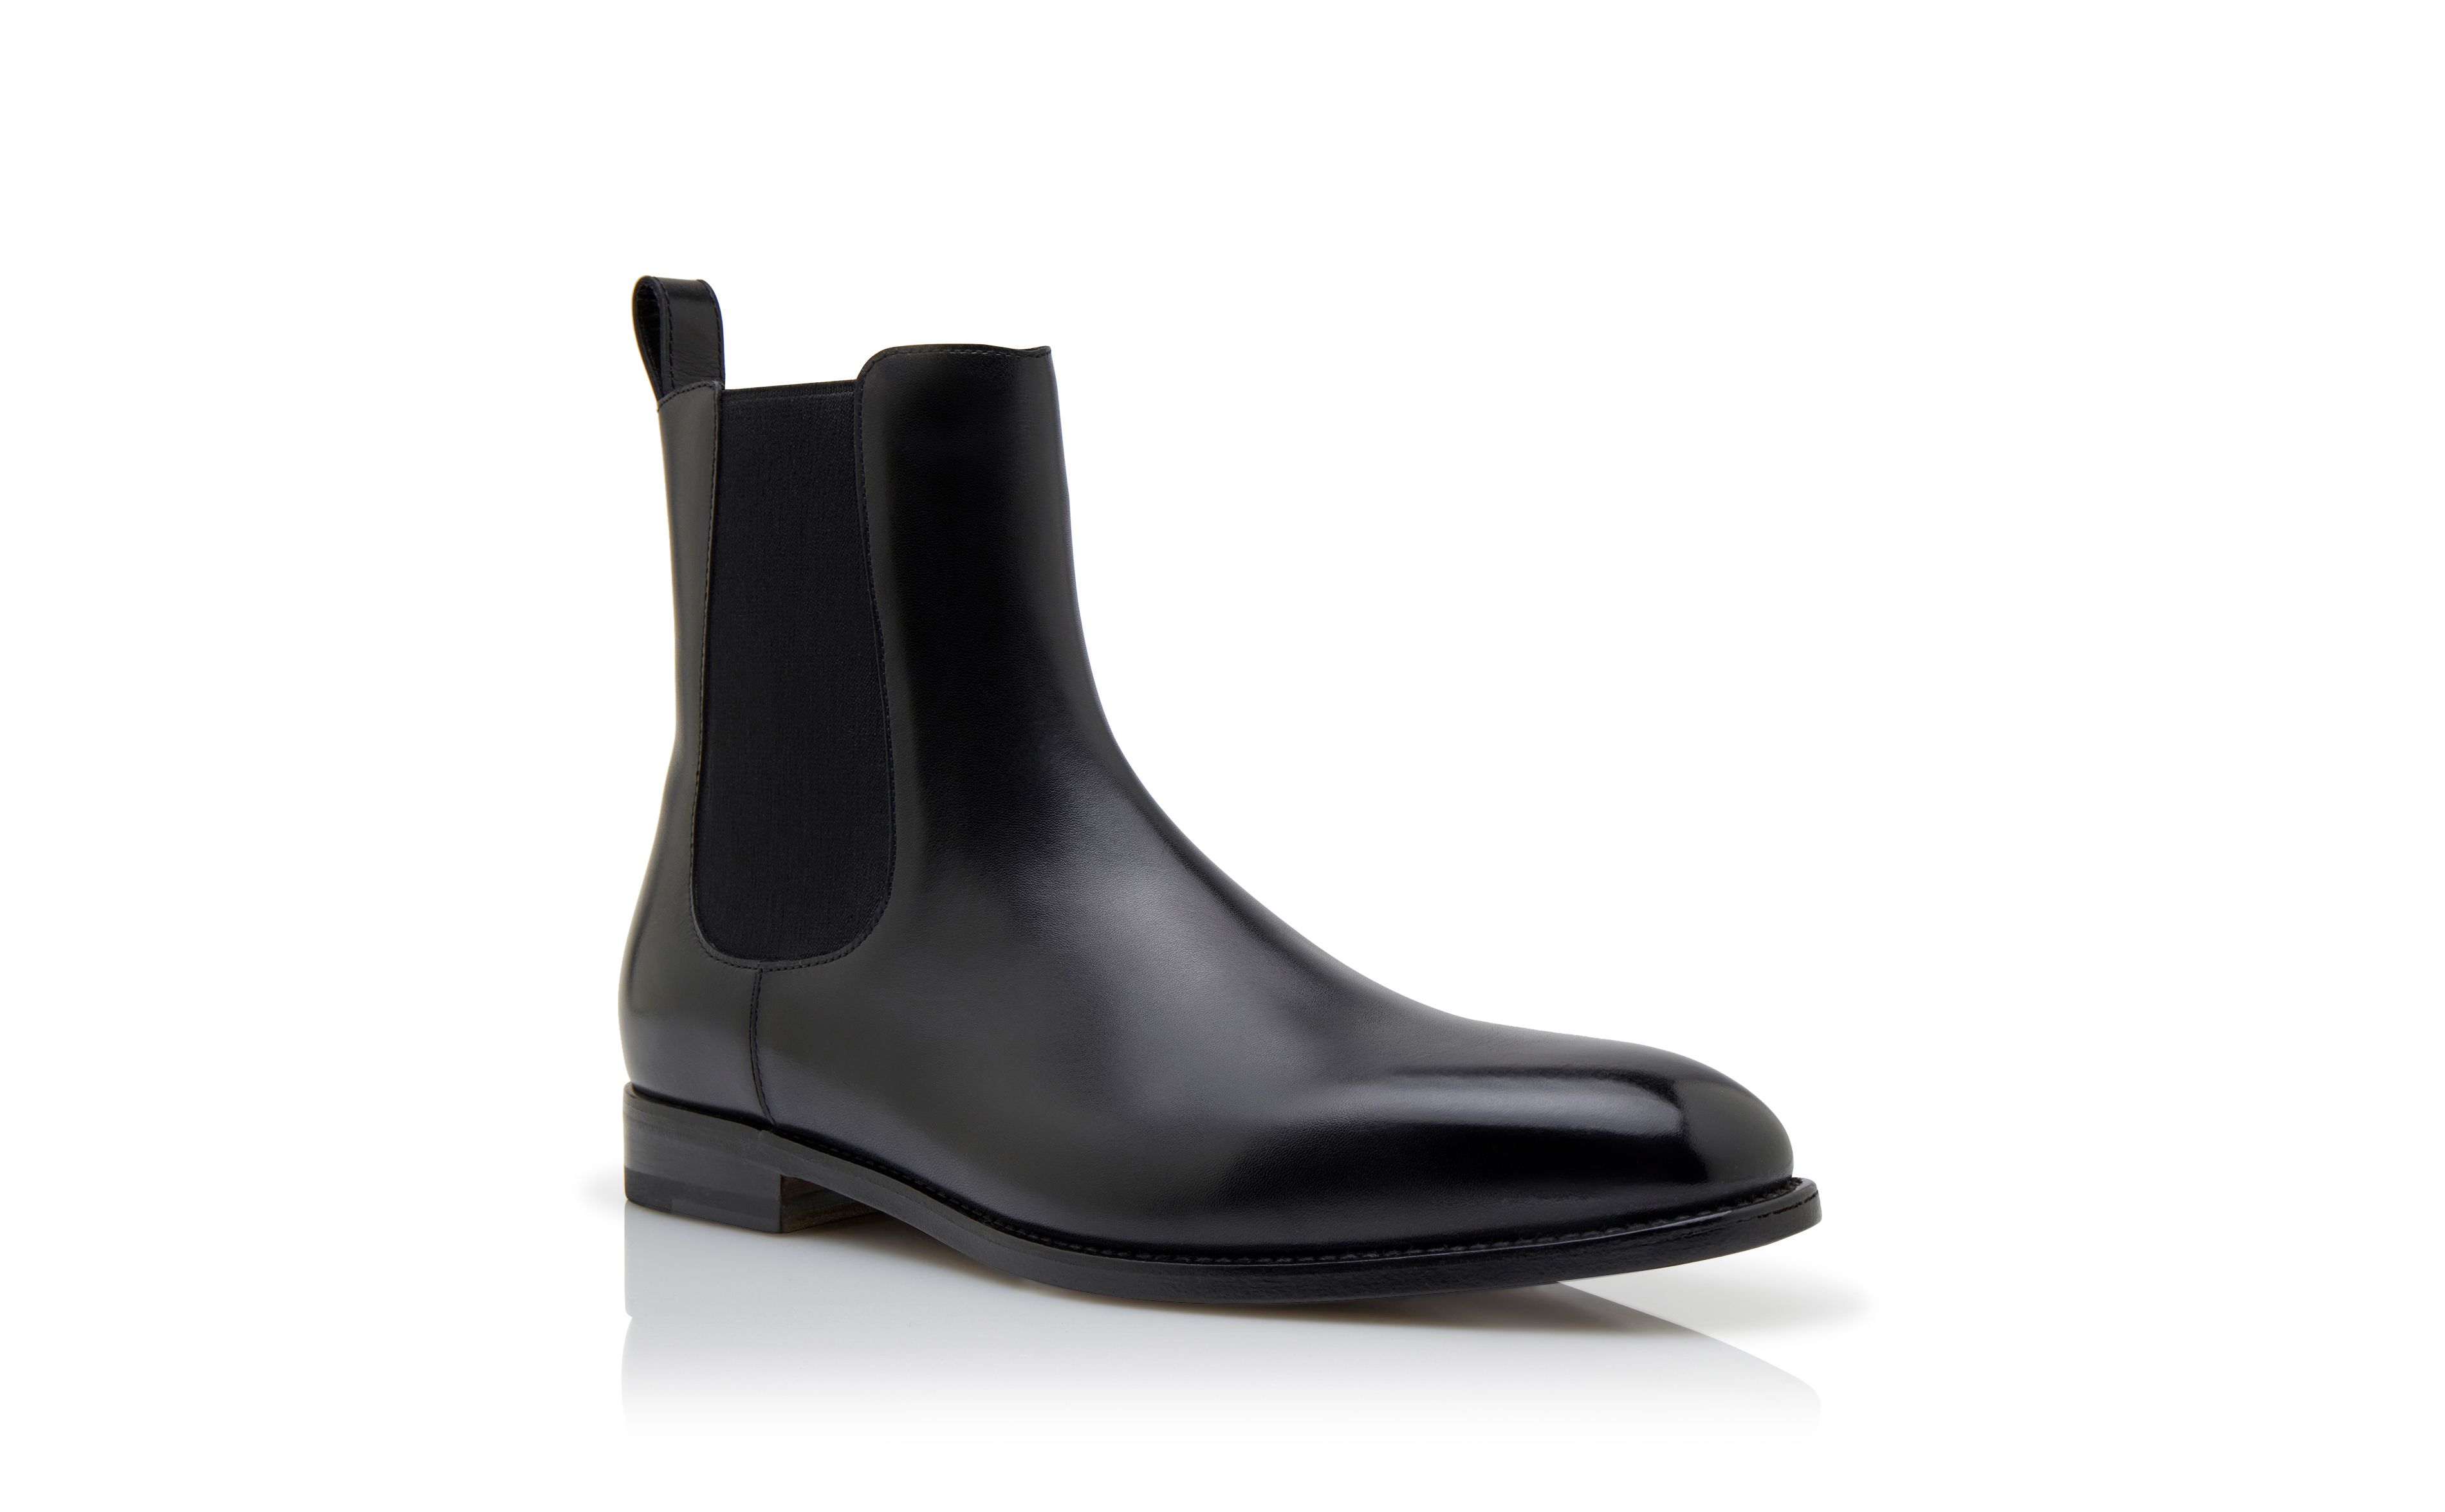 Designer Black Calf Leather Ankle Boots - Image Upsell